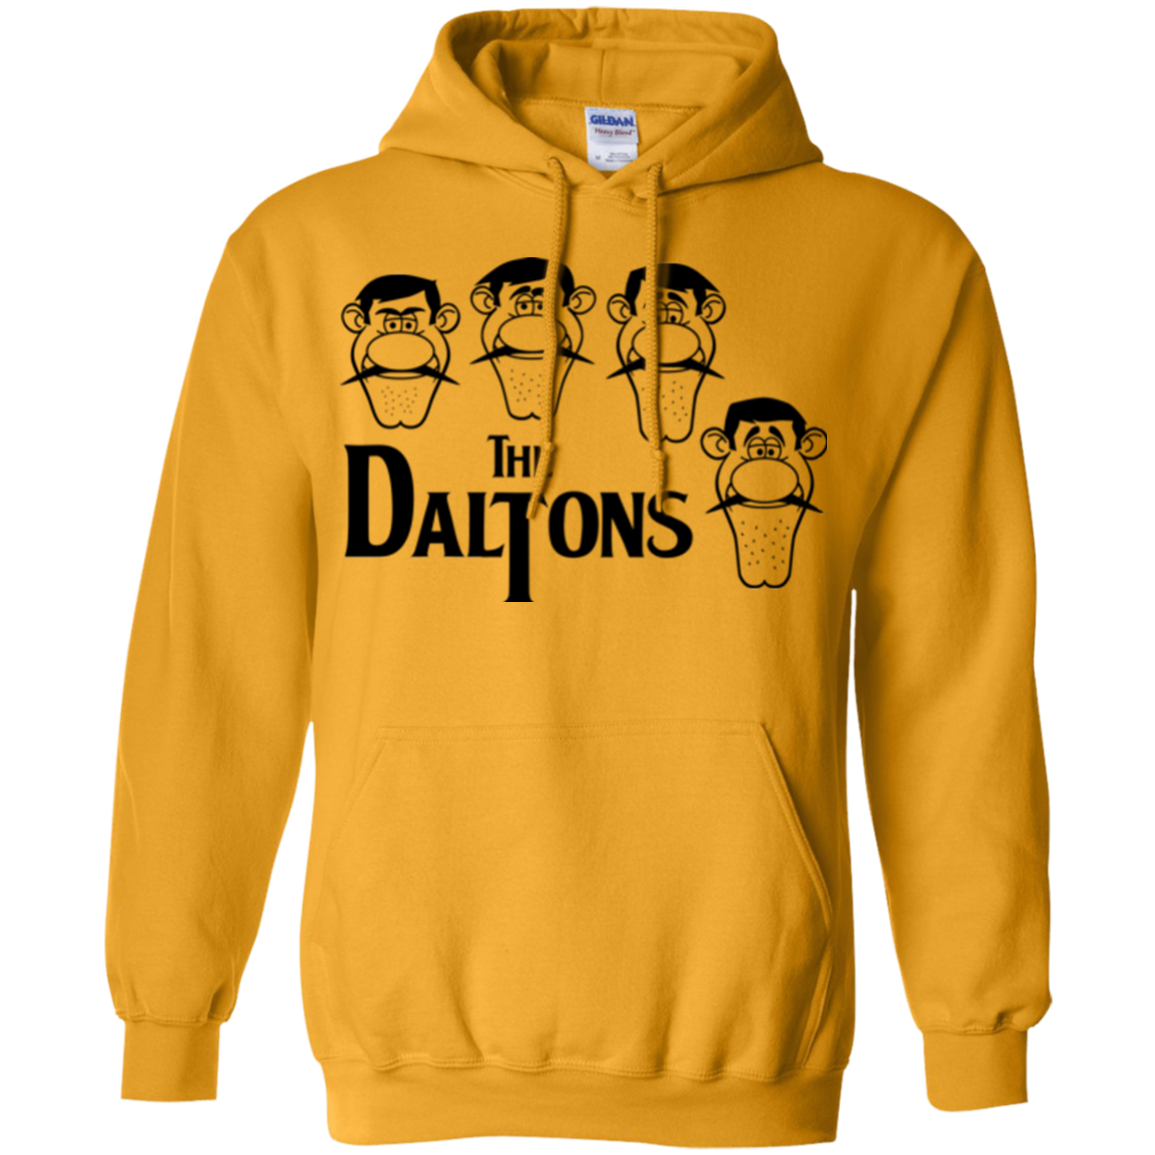 The Daltons Pullover Hoodie